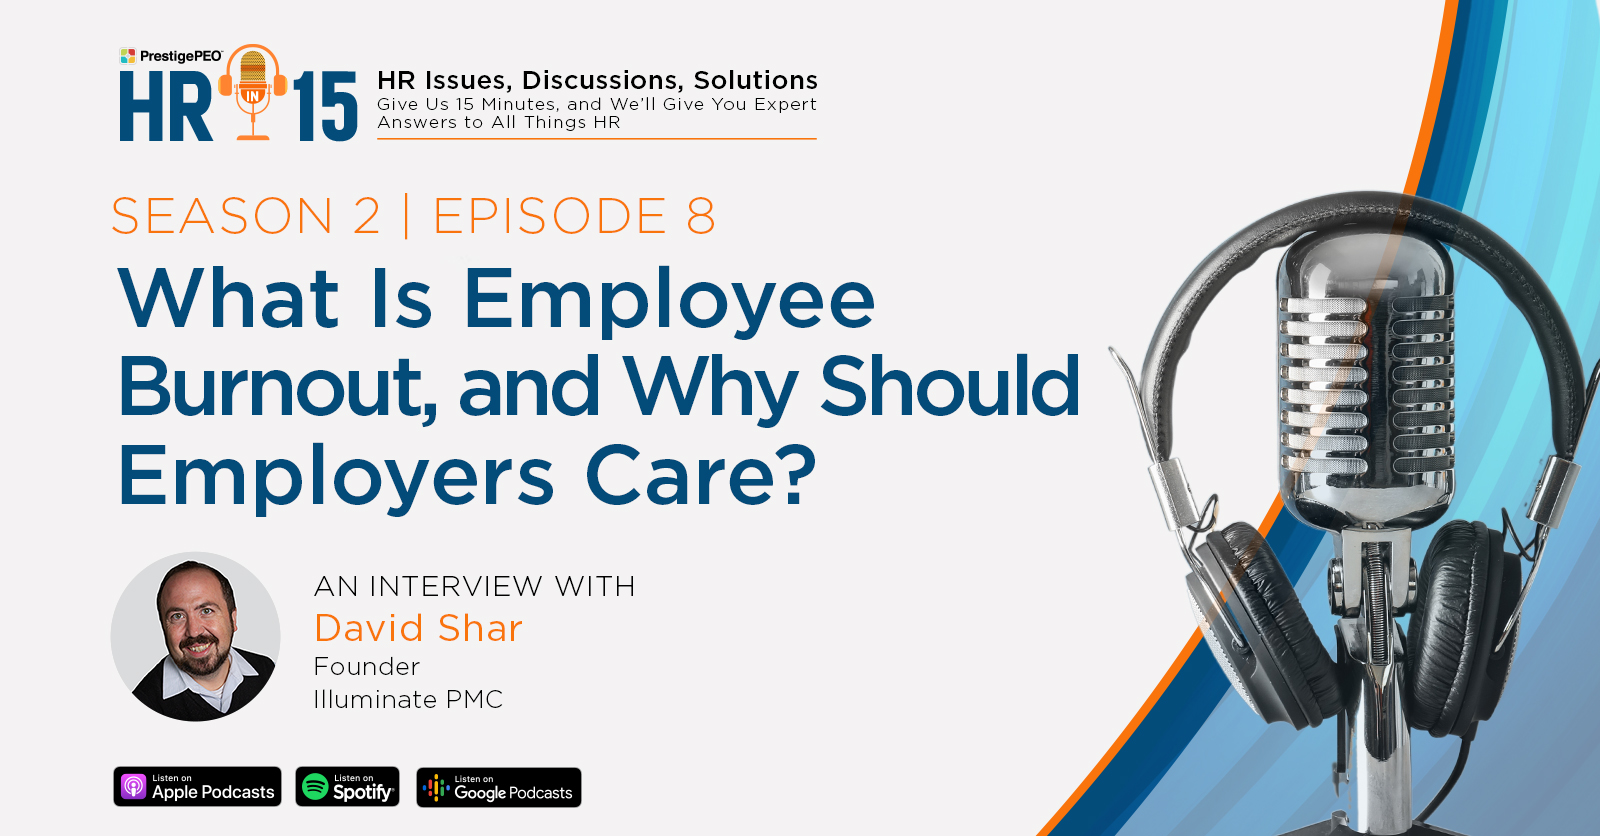 HR-in-15 Interview with David Shar: What is employee burnout, and why should employers care?